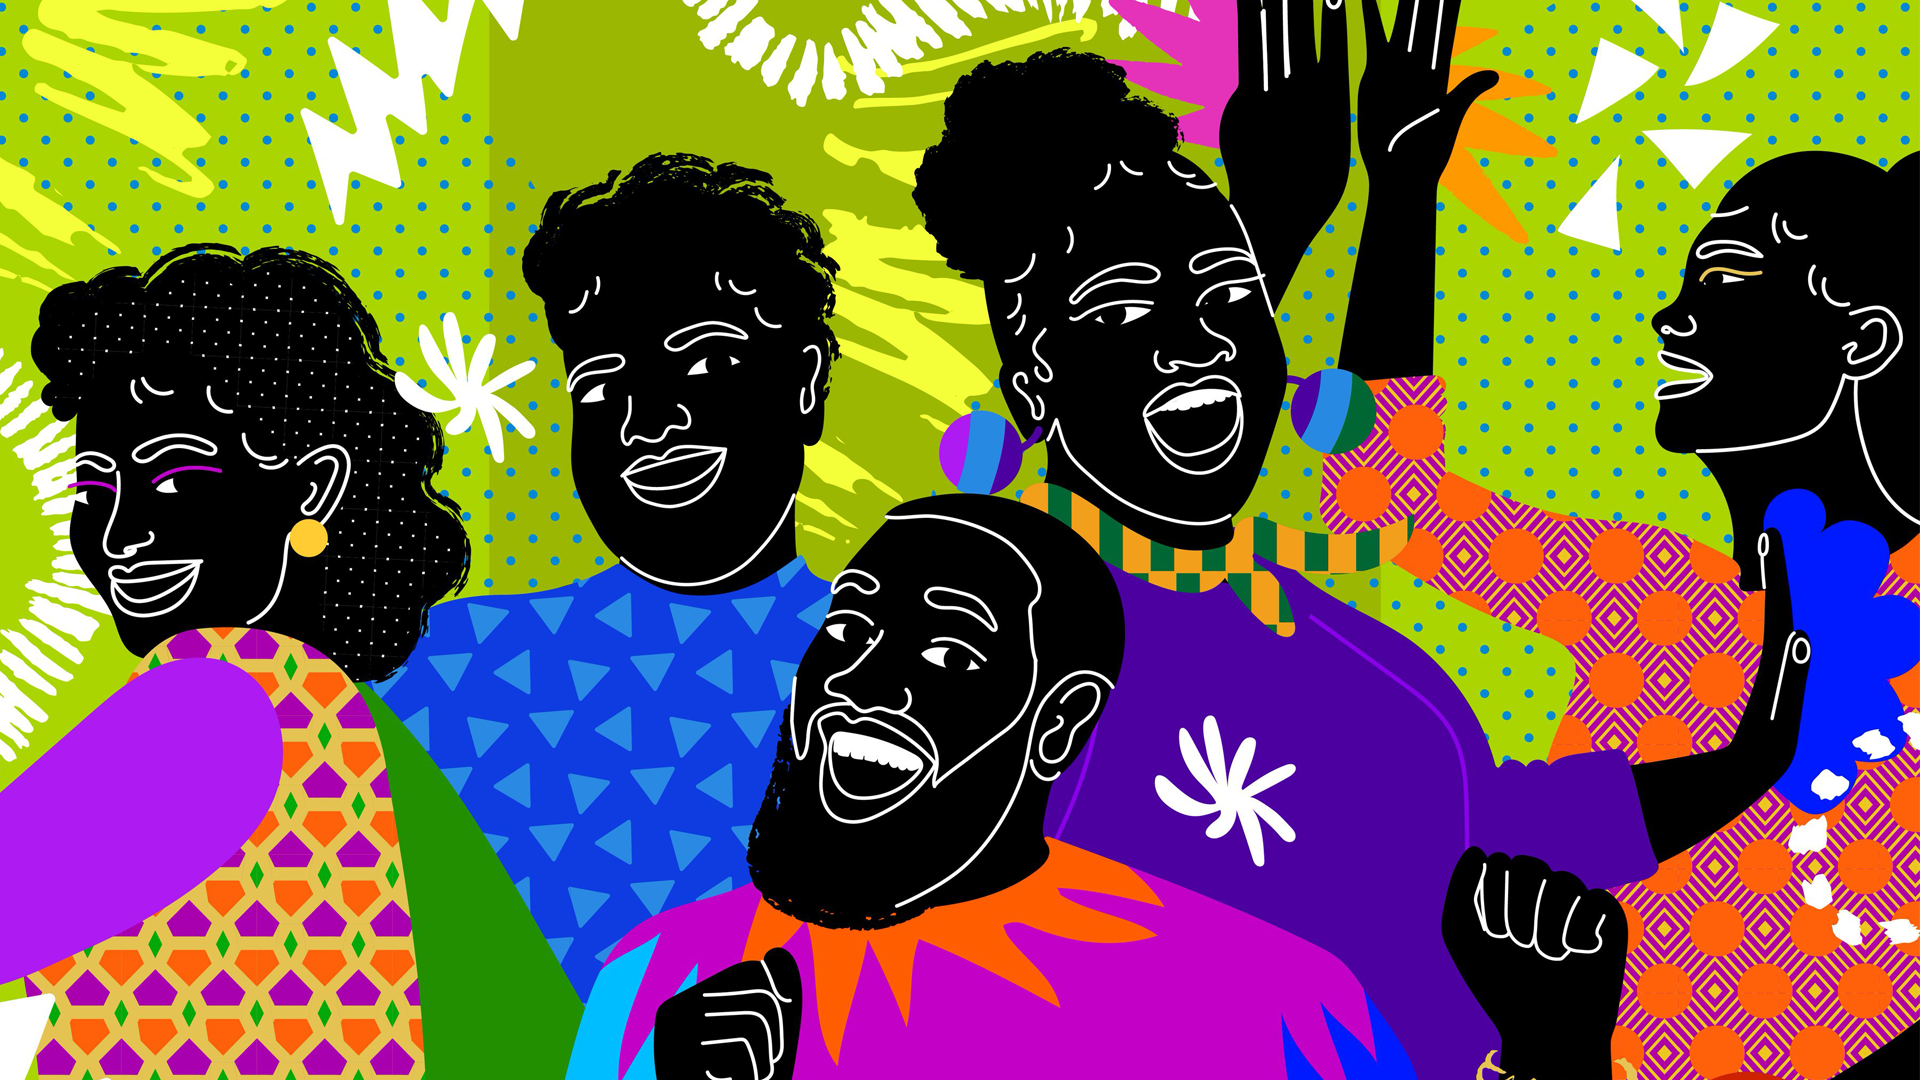 Google has new Black History Month wallpapers for your Pixel phone